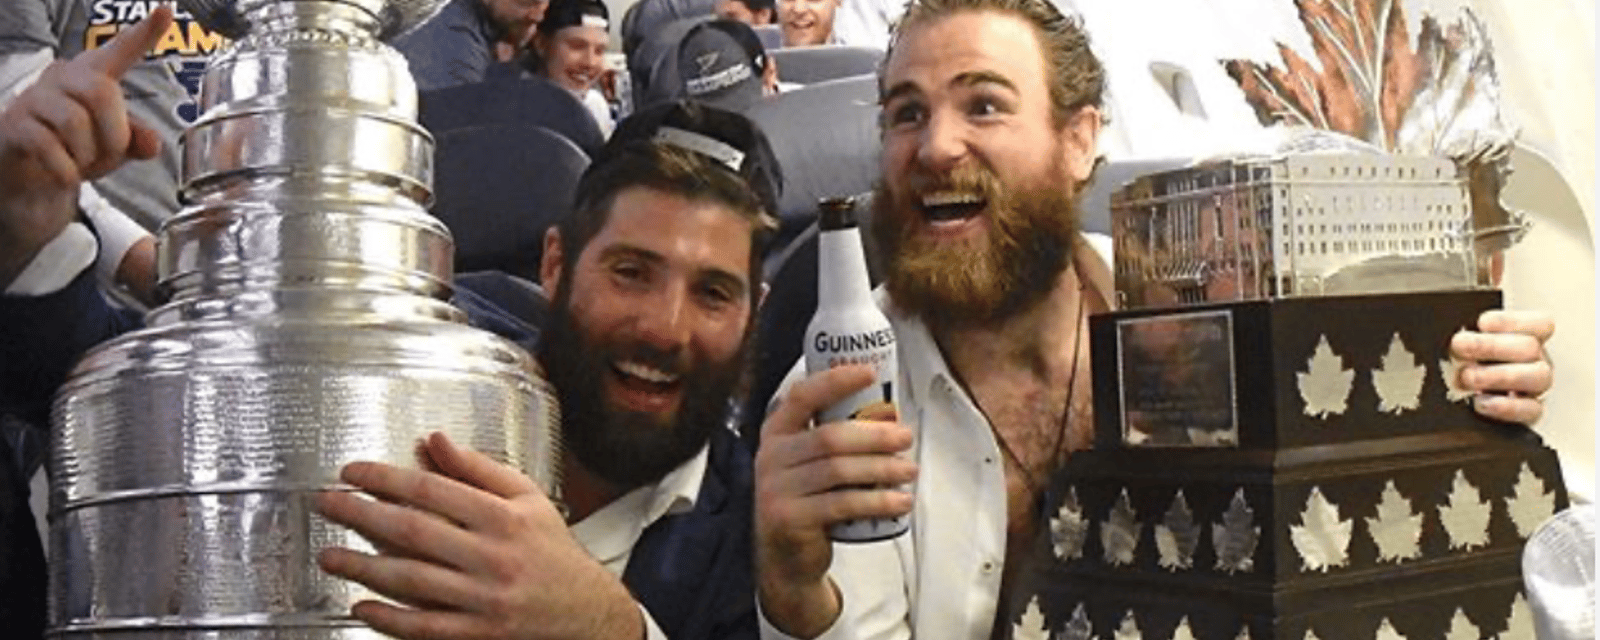 Pat Maroon has words for Ryan O'Reilly